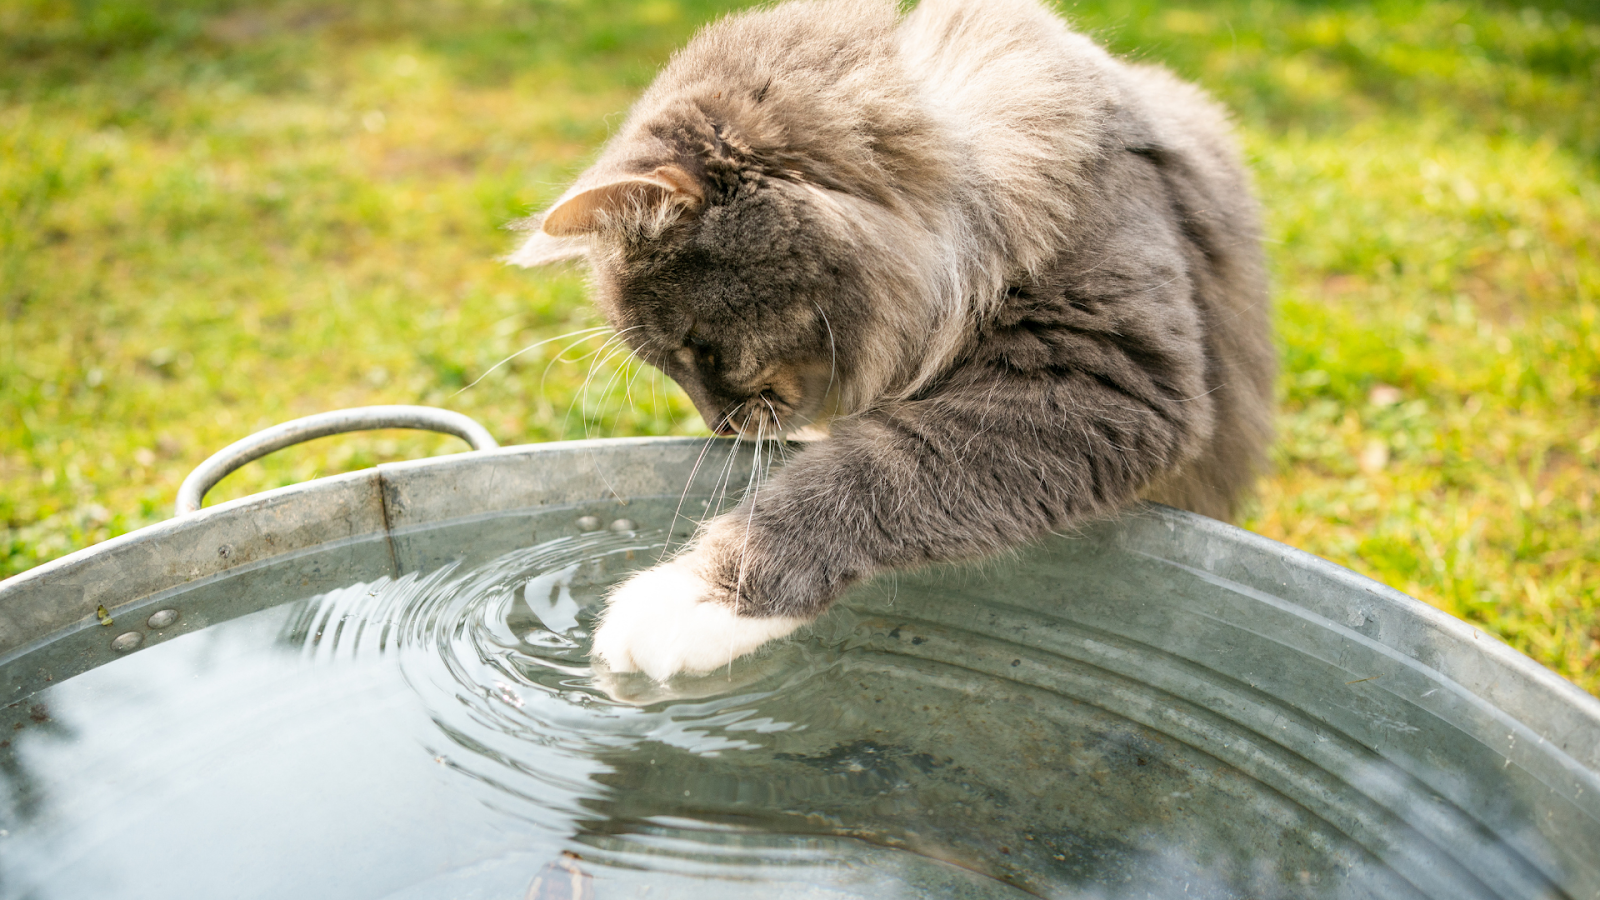 Do cats like water?